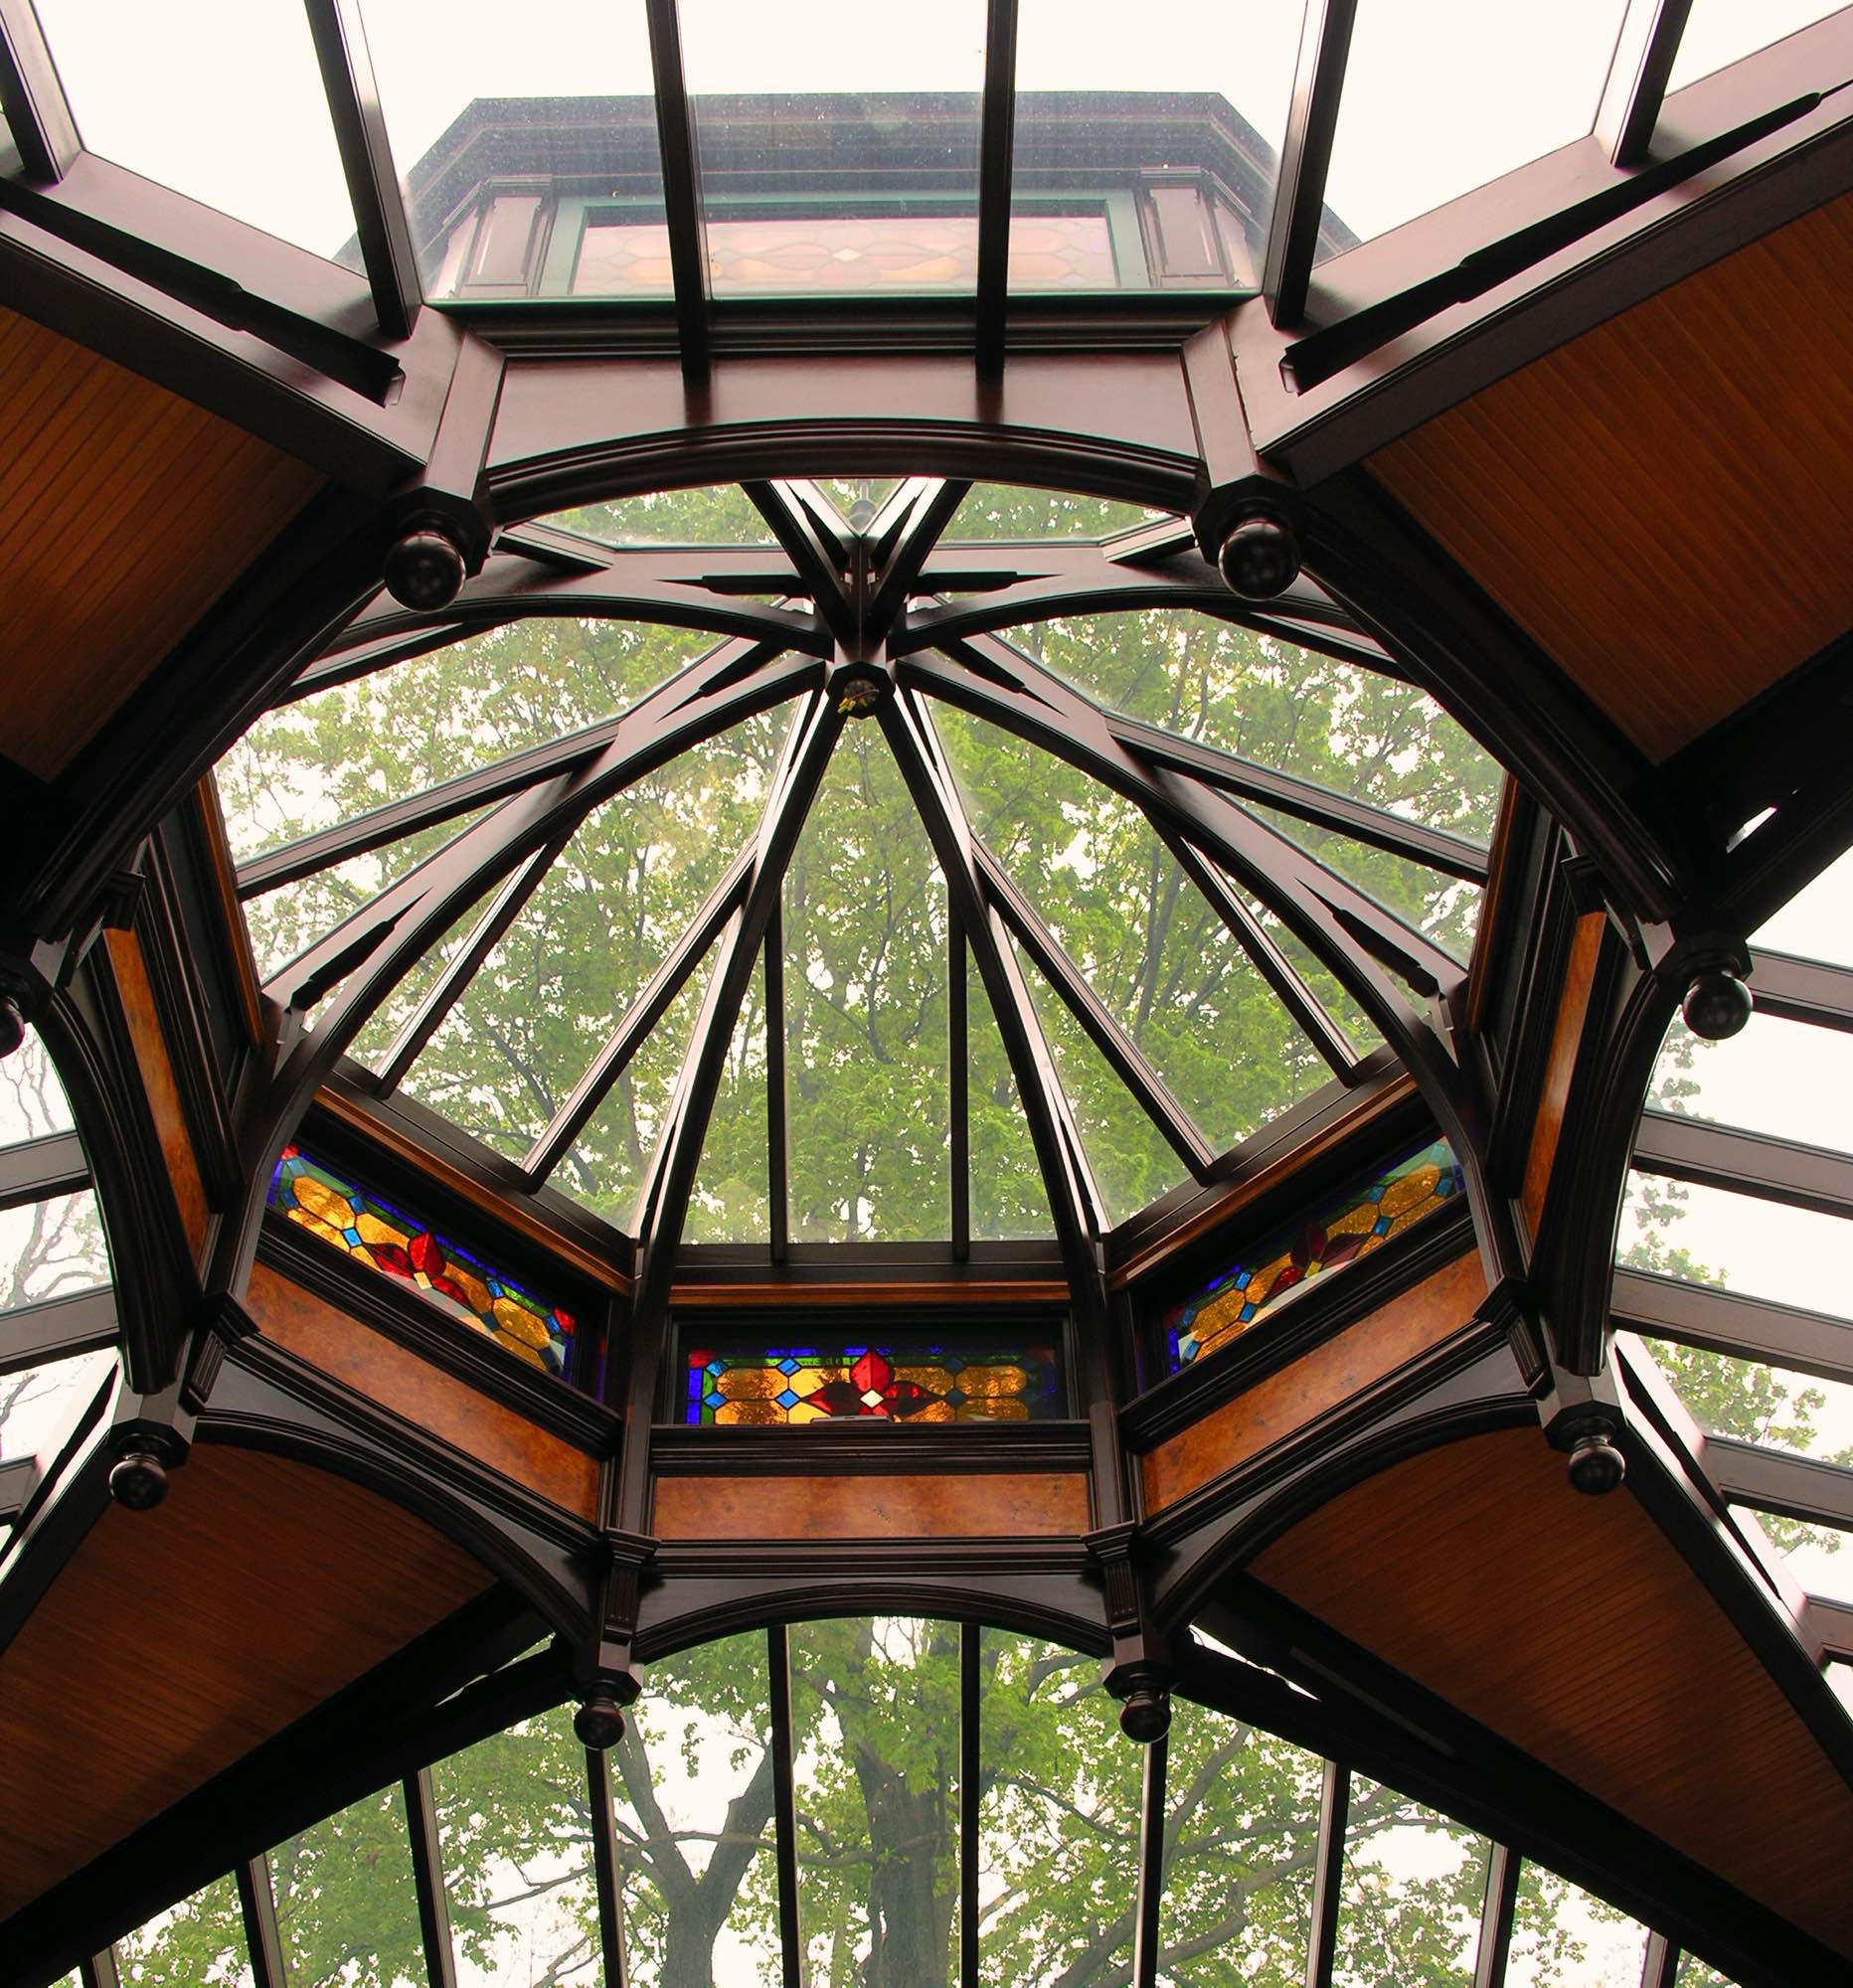 What can a custom skylight for for you?!